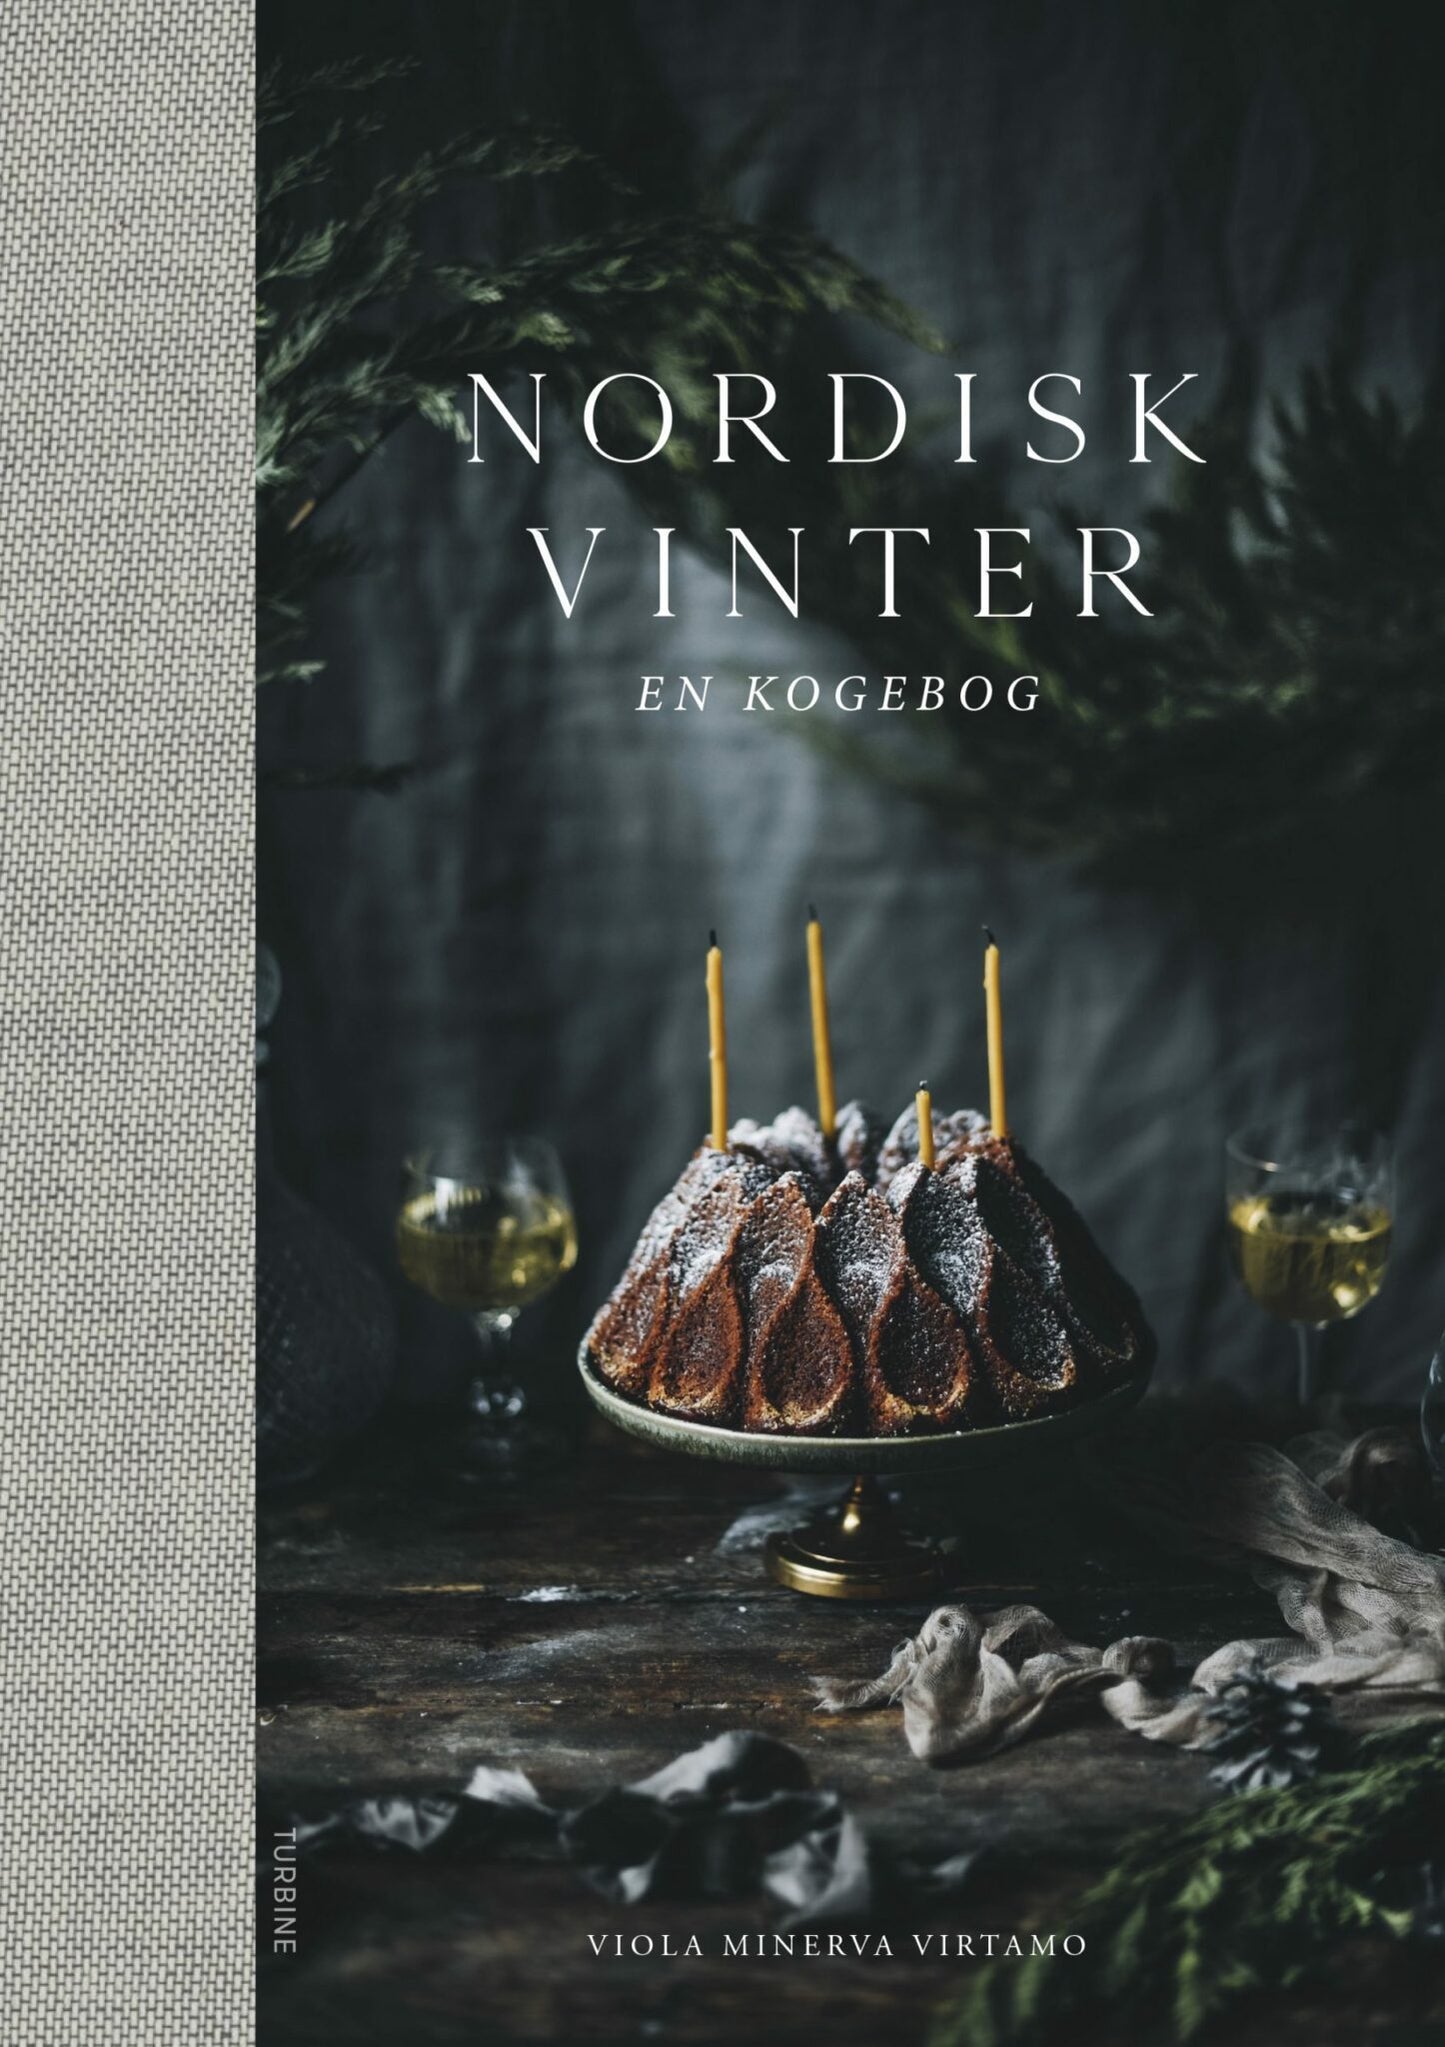 New Mags | Nordisk Vinter